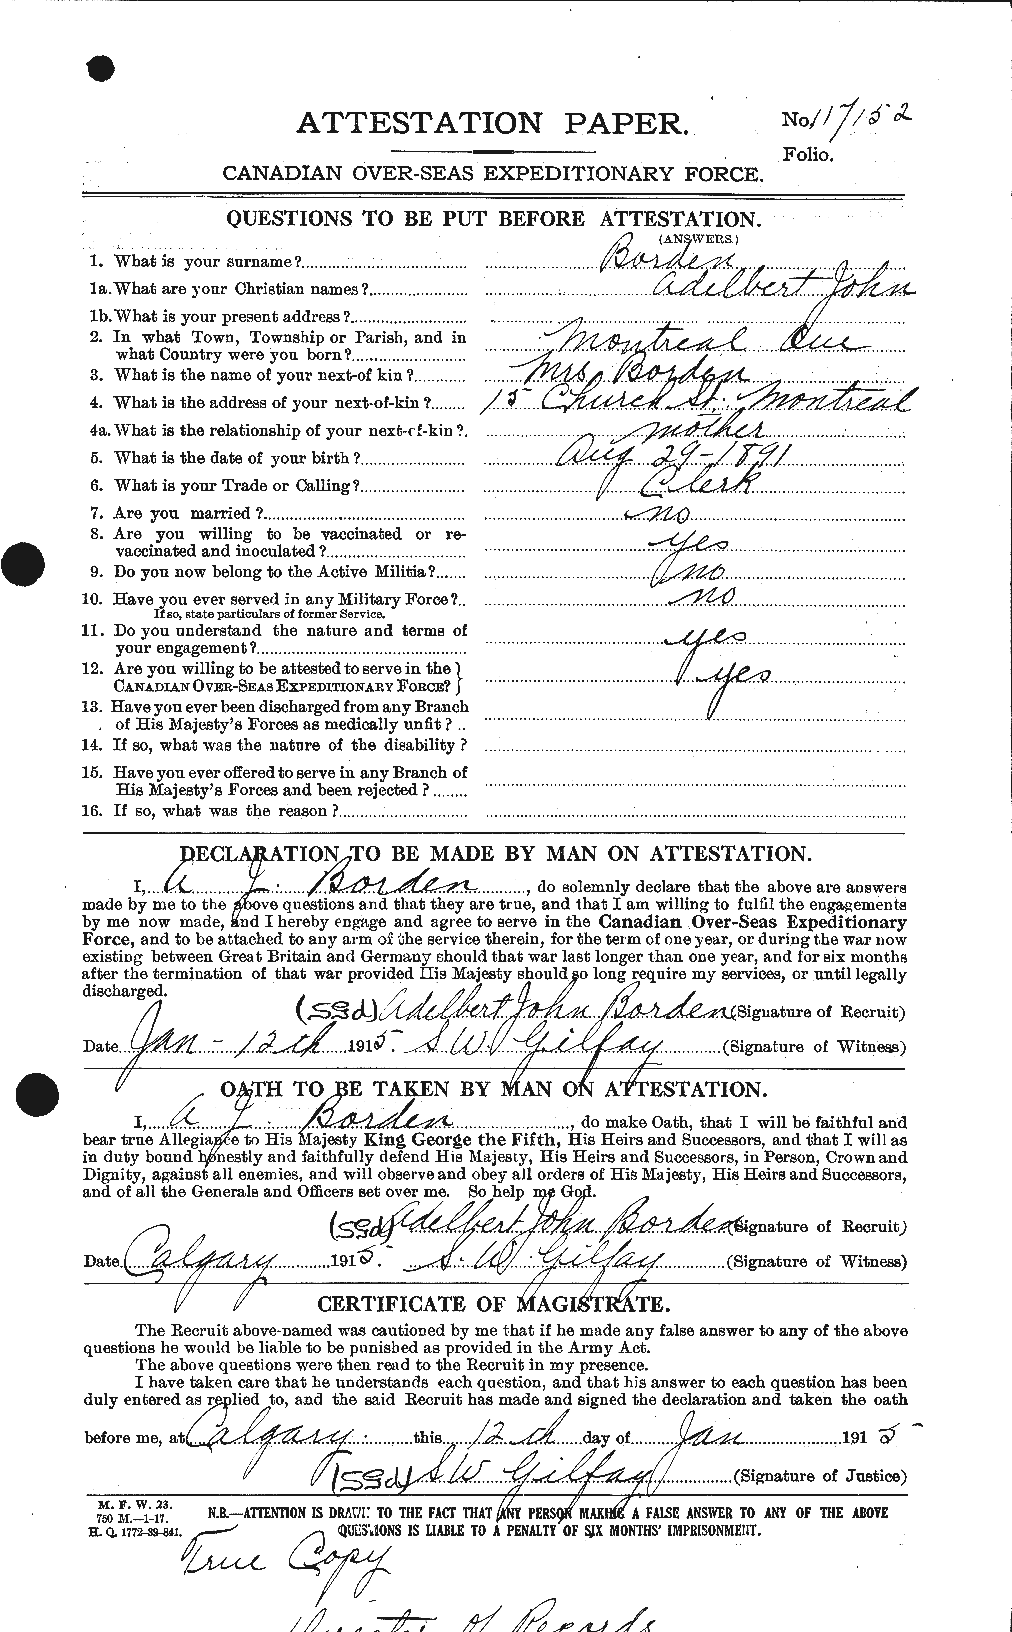 Personnel Records of the First World War - CEF 252279a